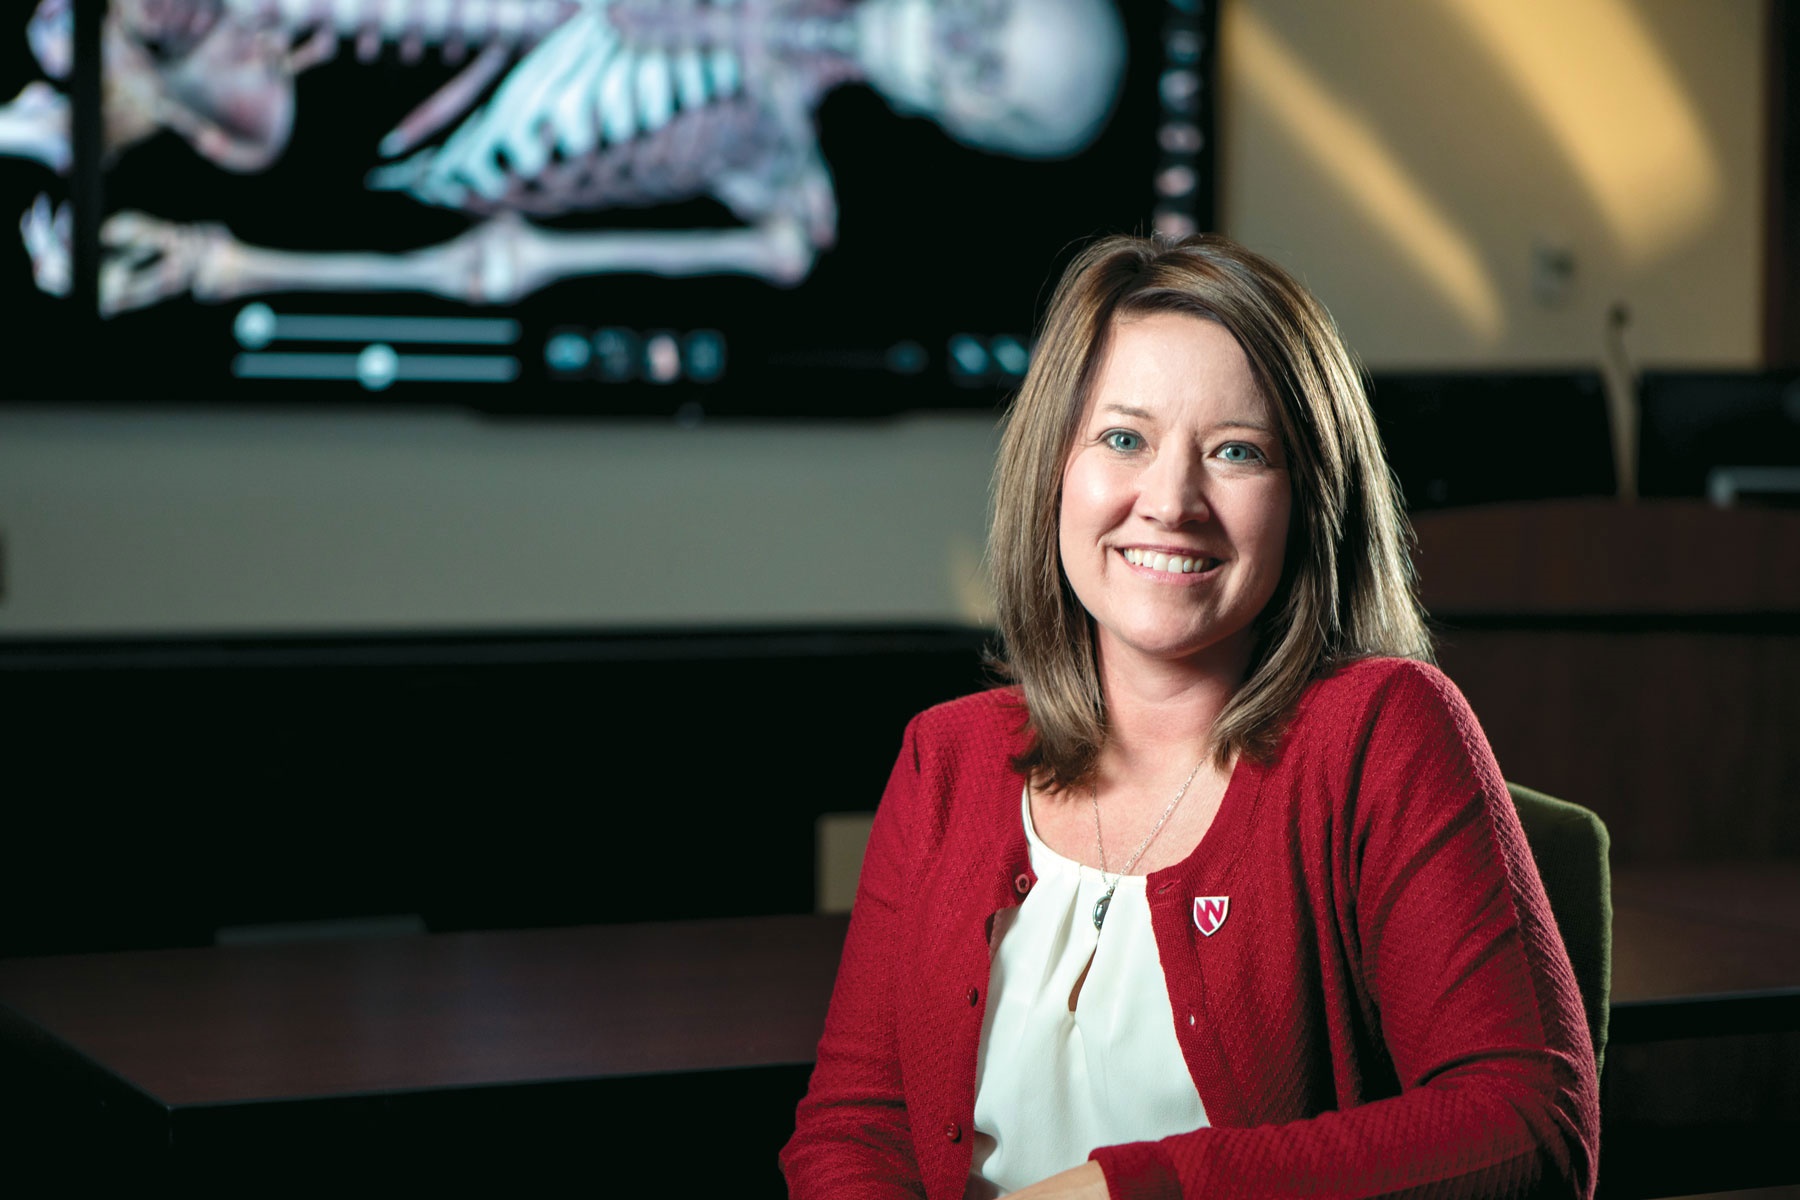 Tanya Custer, MS R.T. (R)(T), Assistant Professor, College of Allied Health Professions